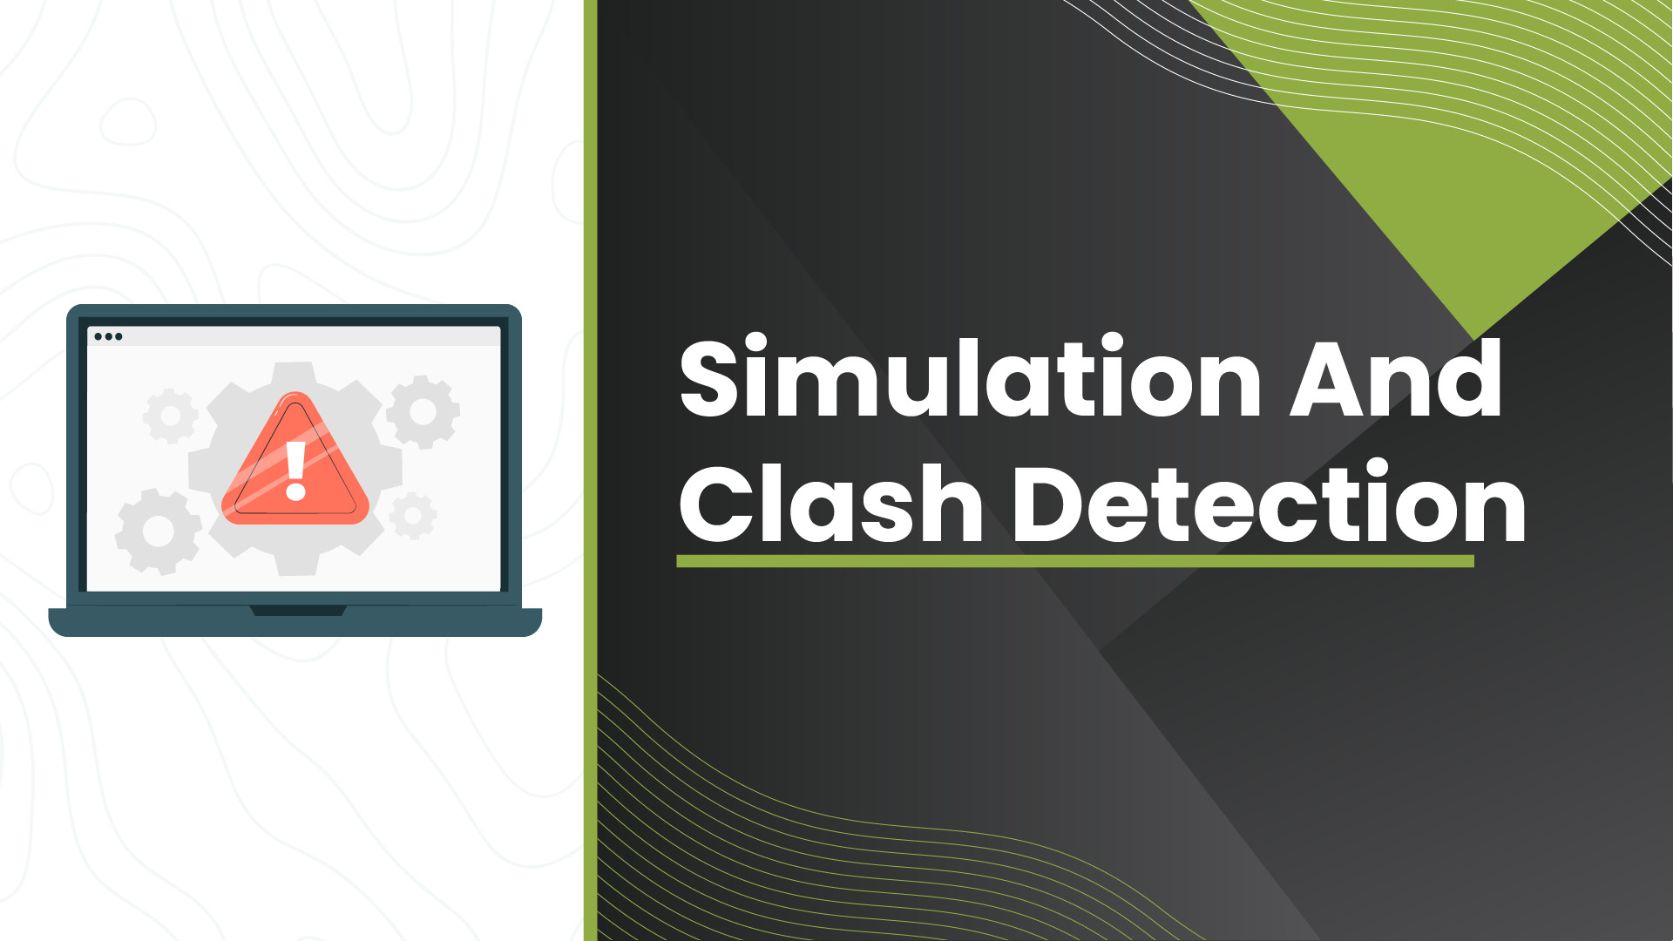 Simulation And Clash Detection